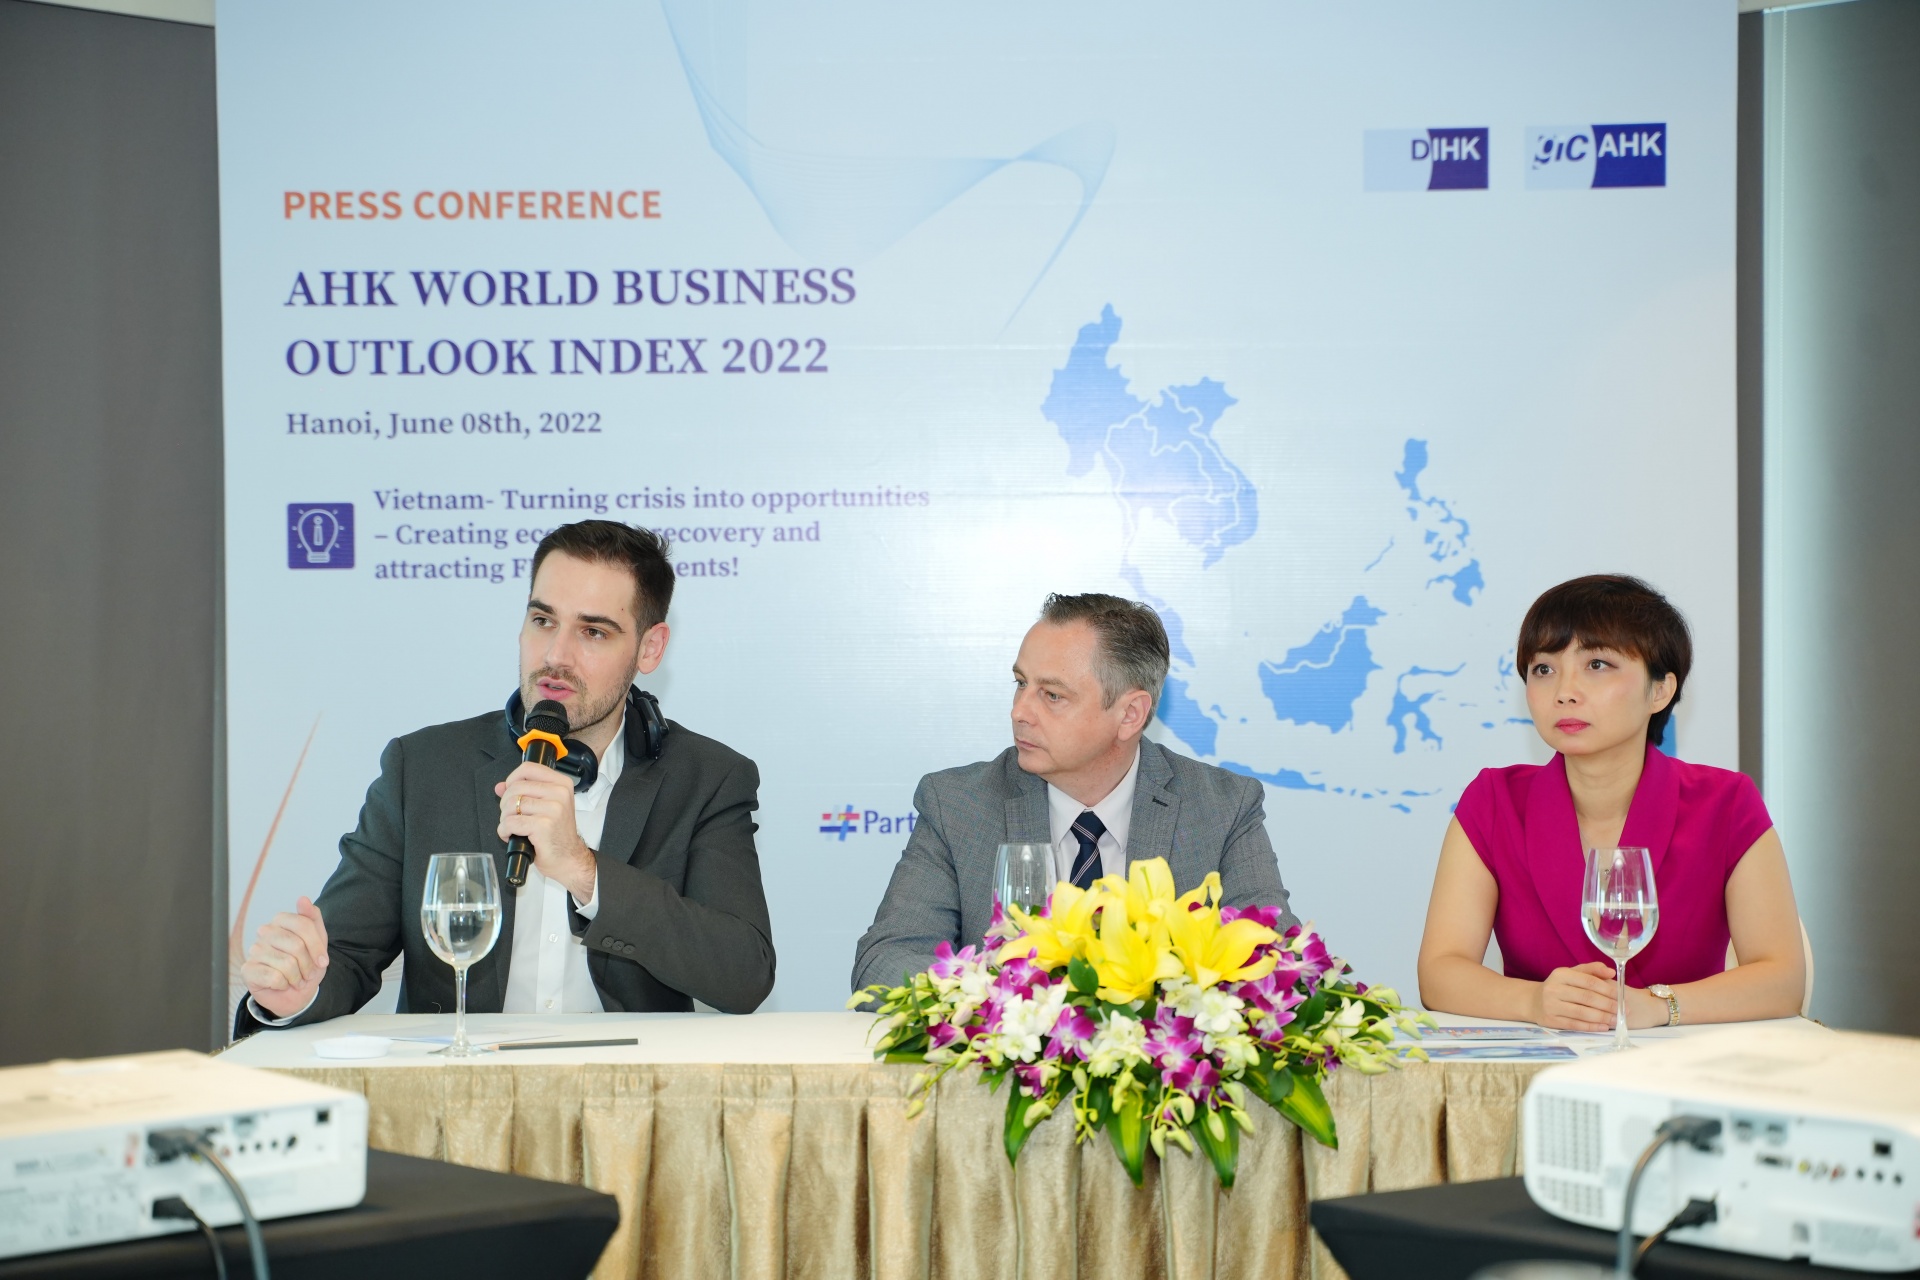 German groups continue to invest in Vietnam with improved confidence